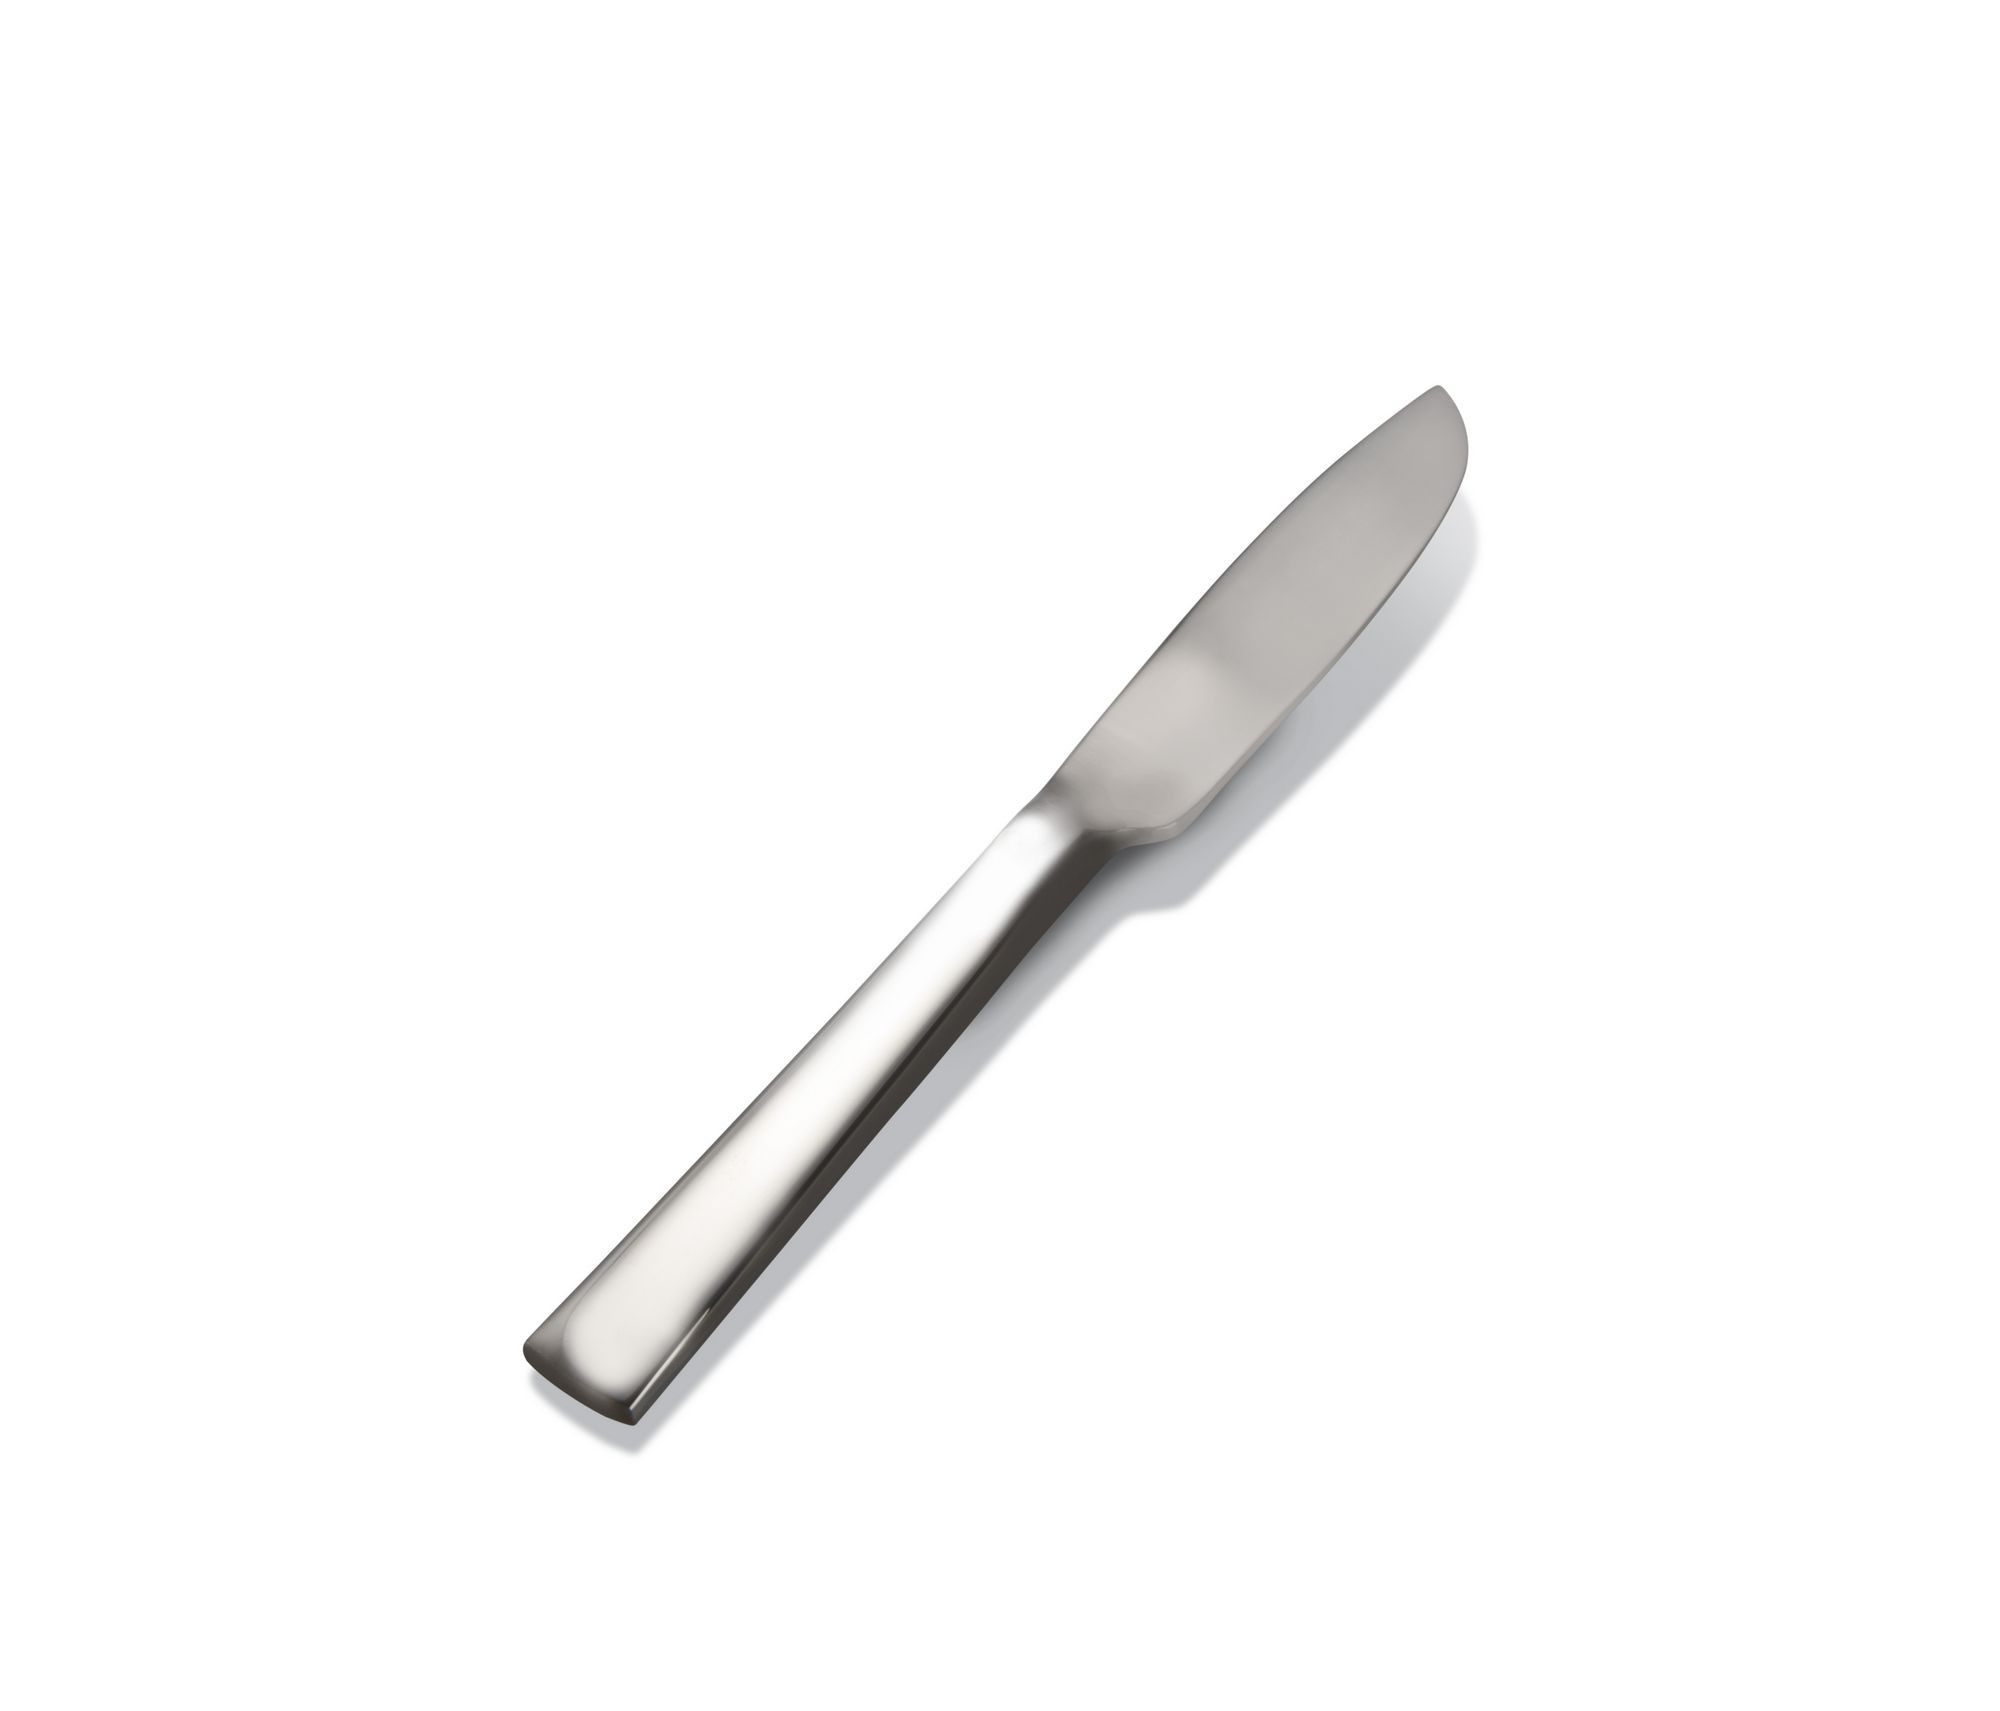 Bon Chef S3713S Roman 18/8 Stainless Steel Silverplated Butter Knife